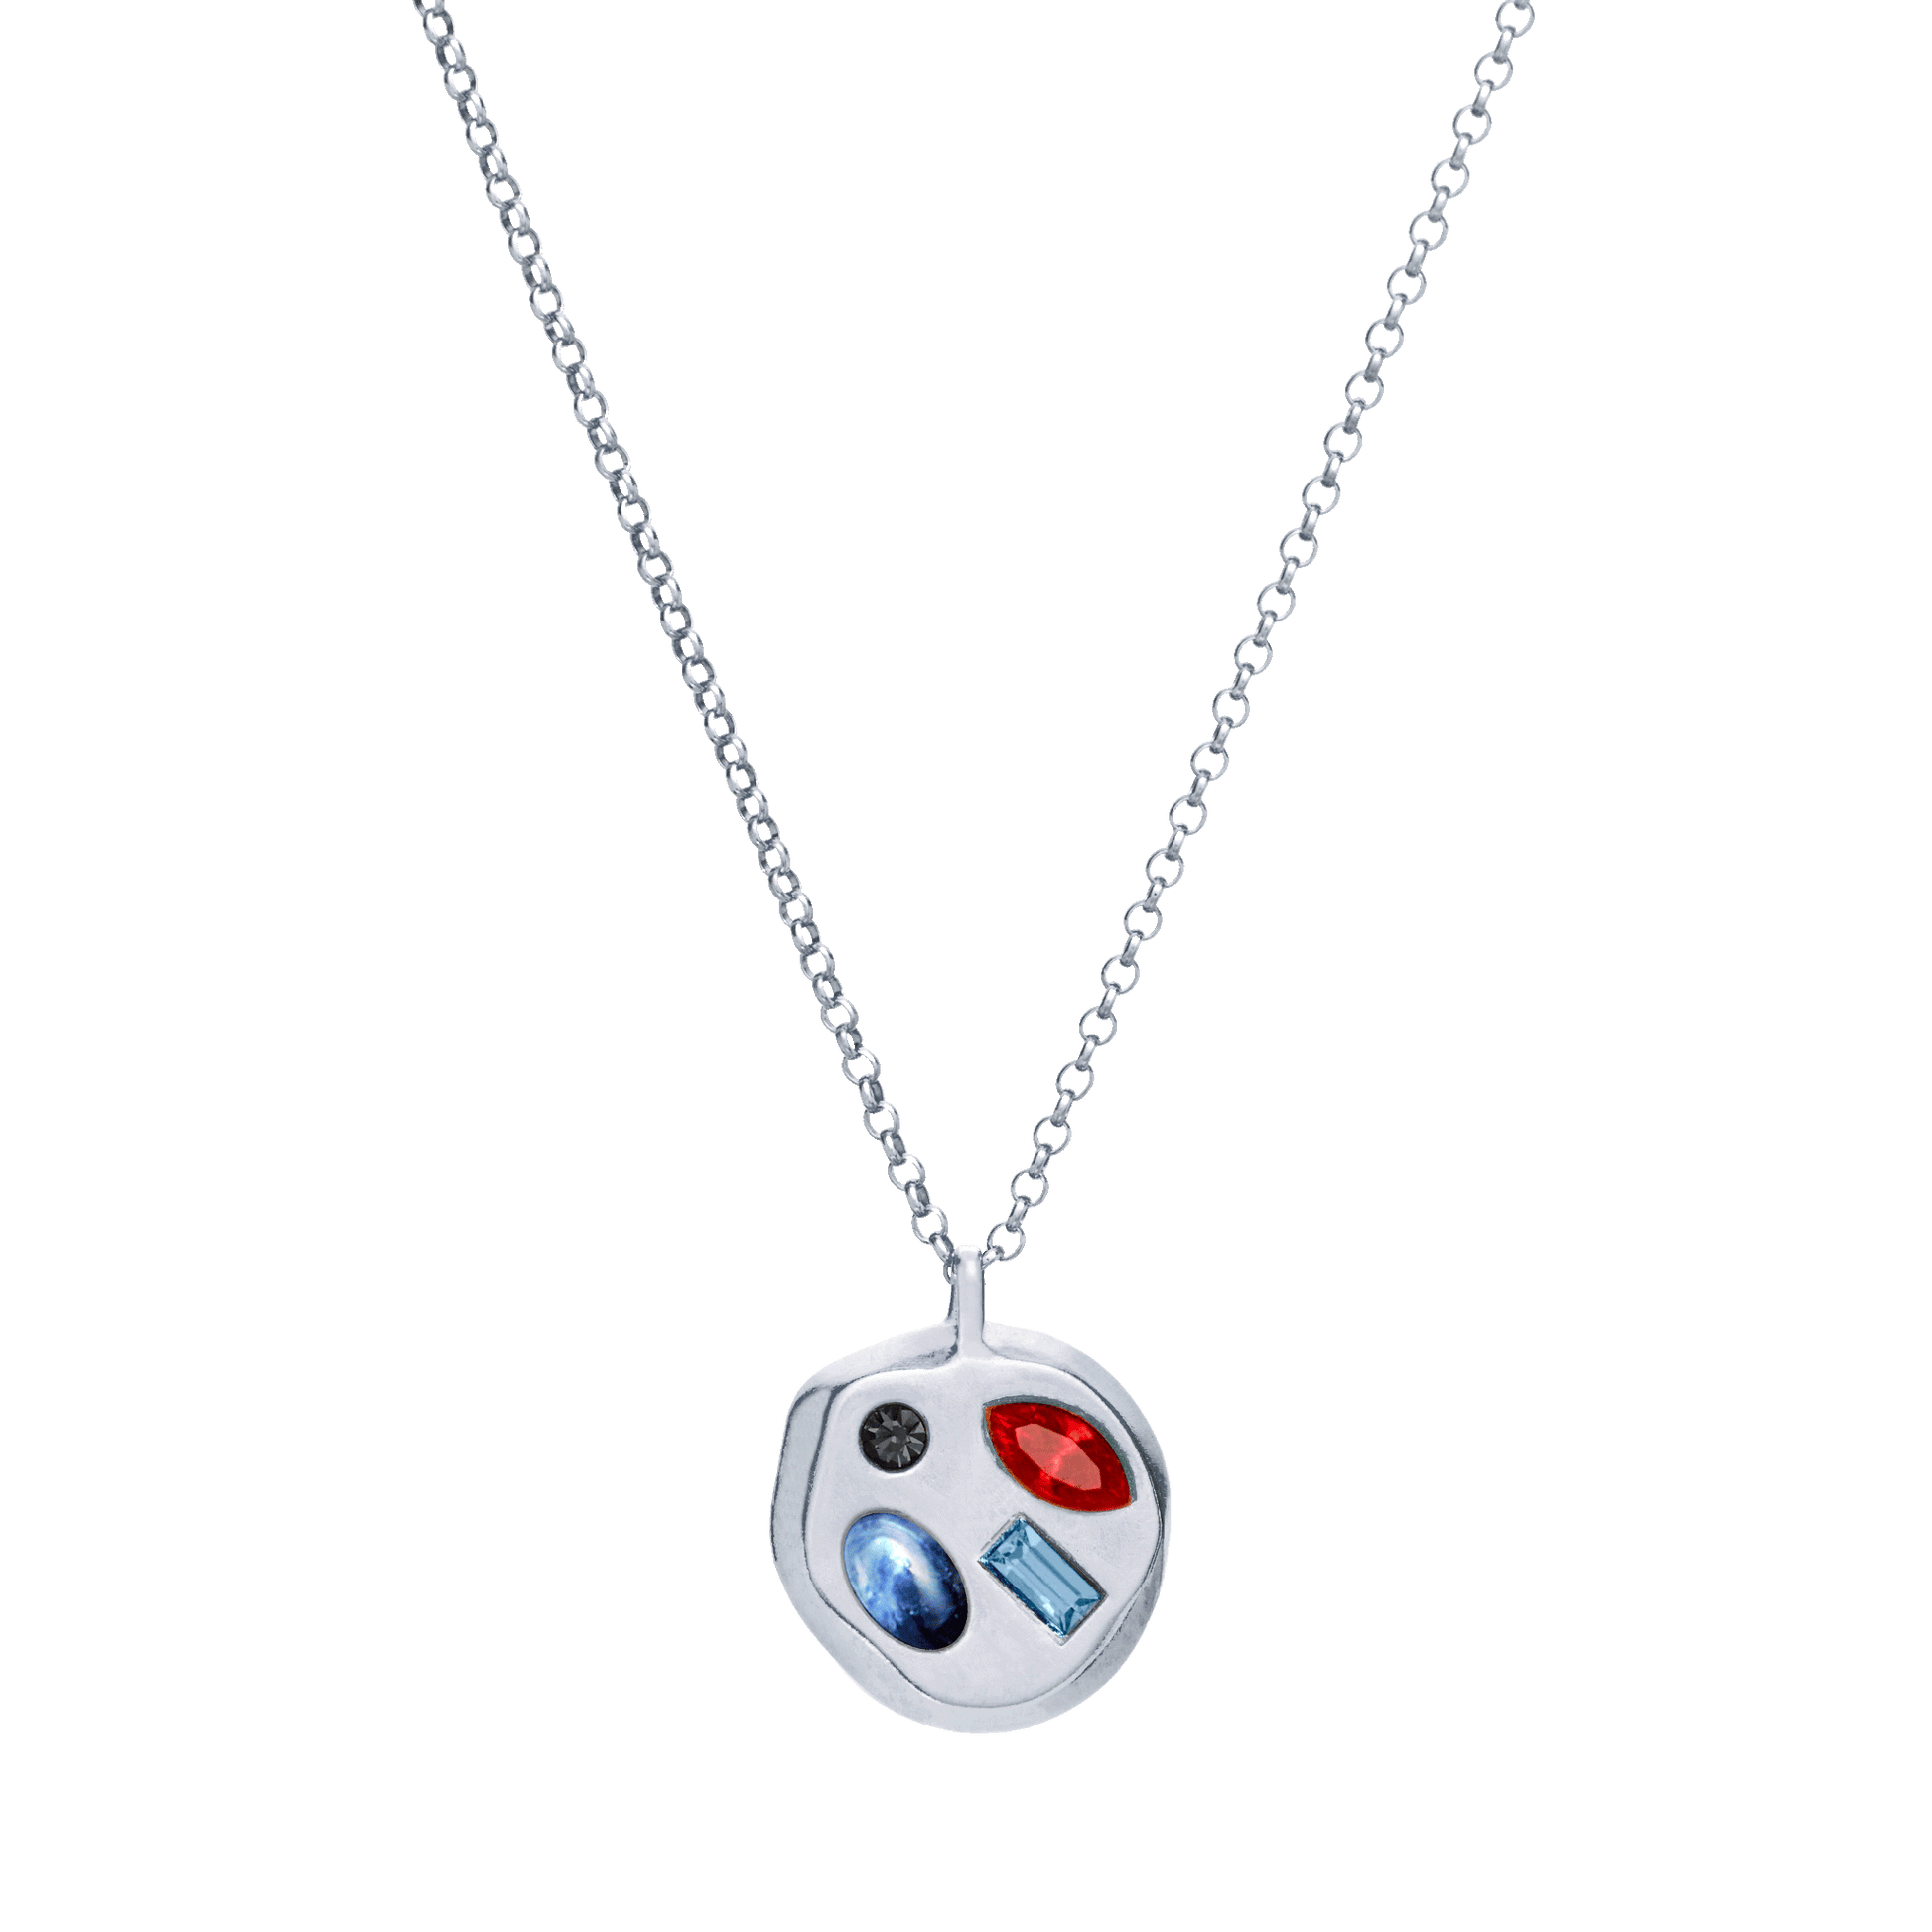 The July Thirteenth Pendant in Sterling Silver